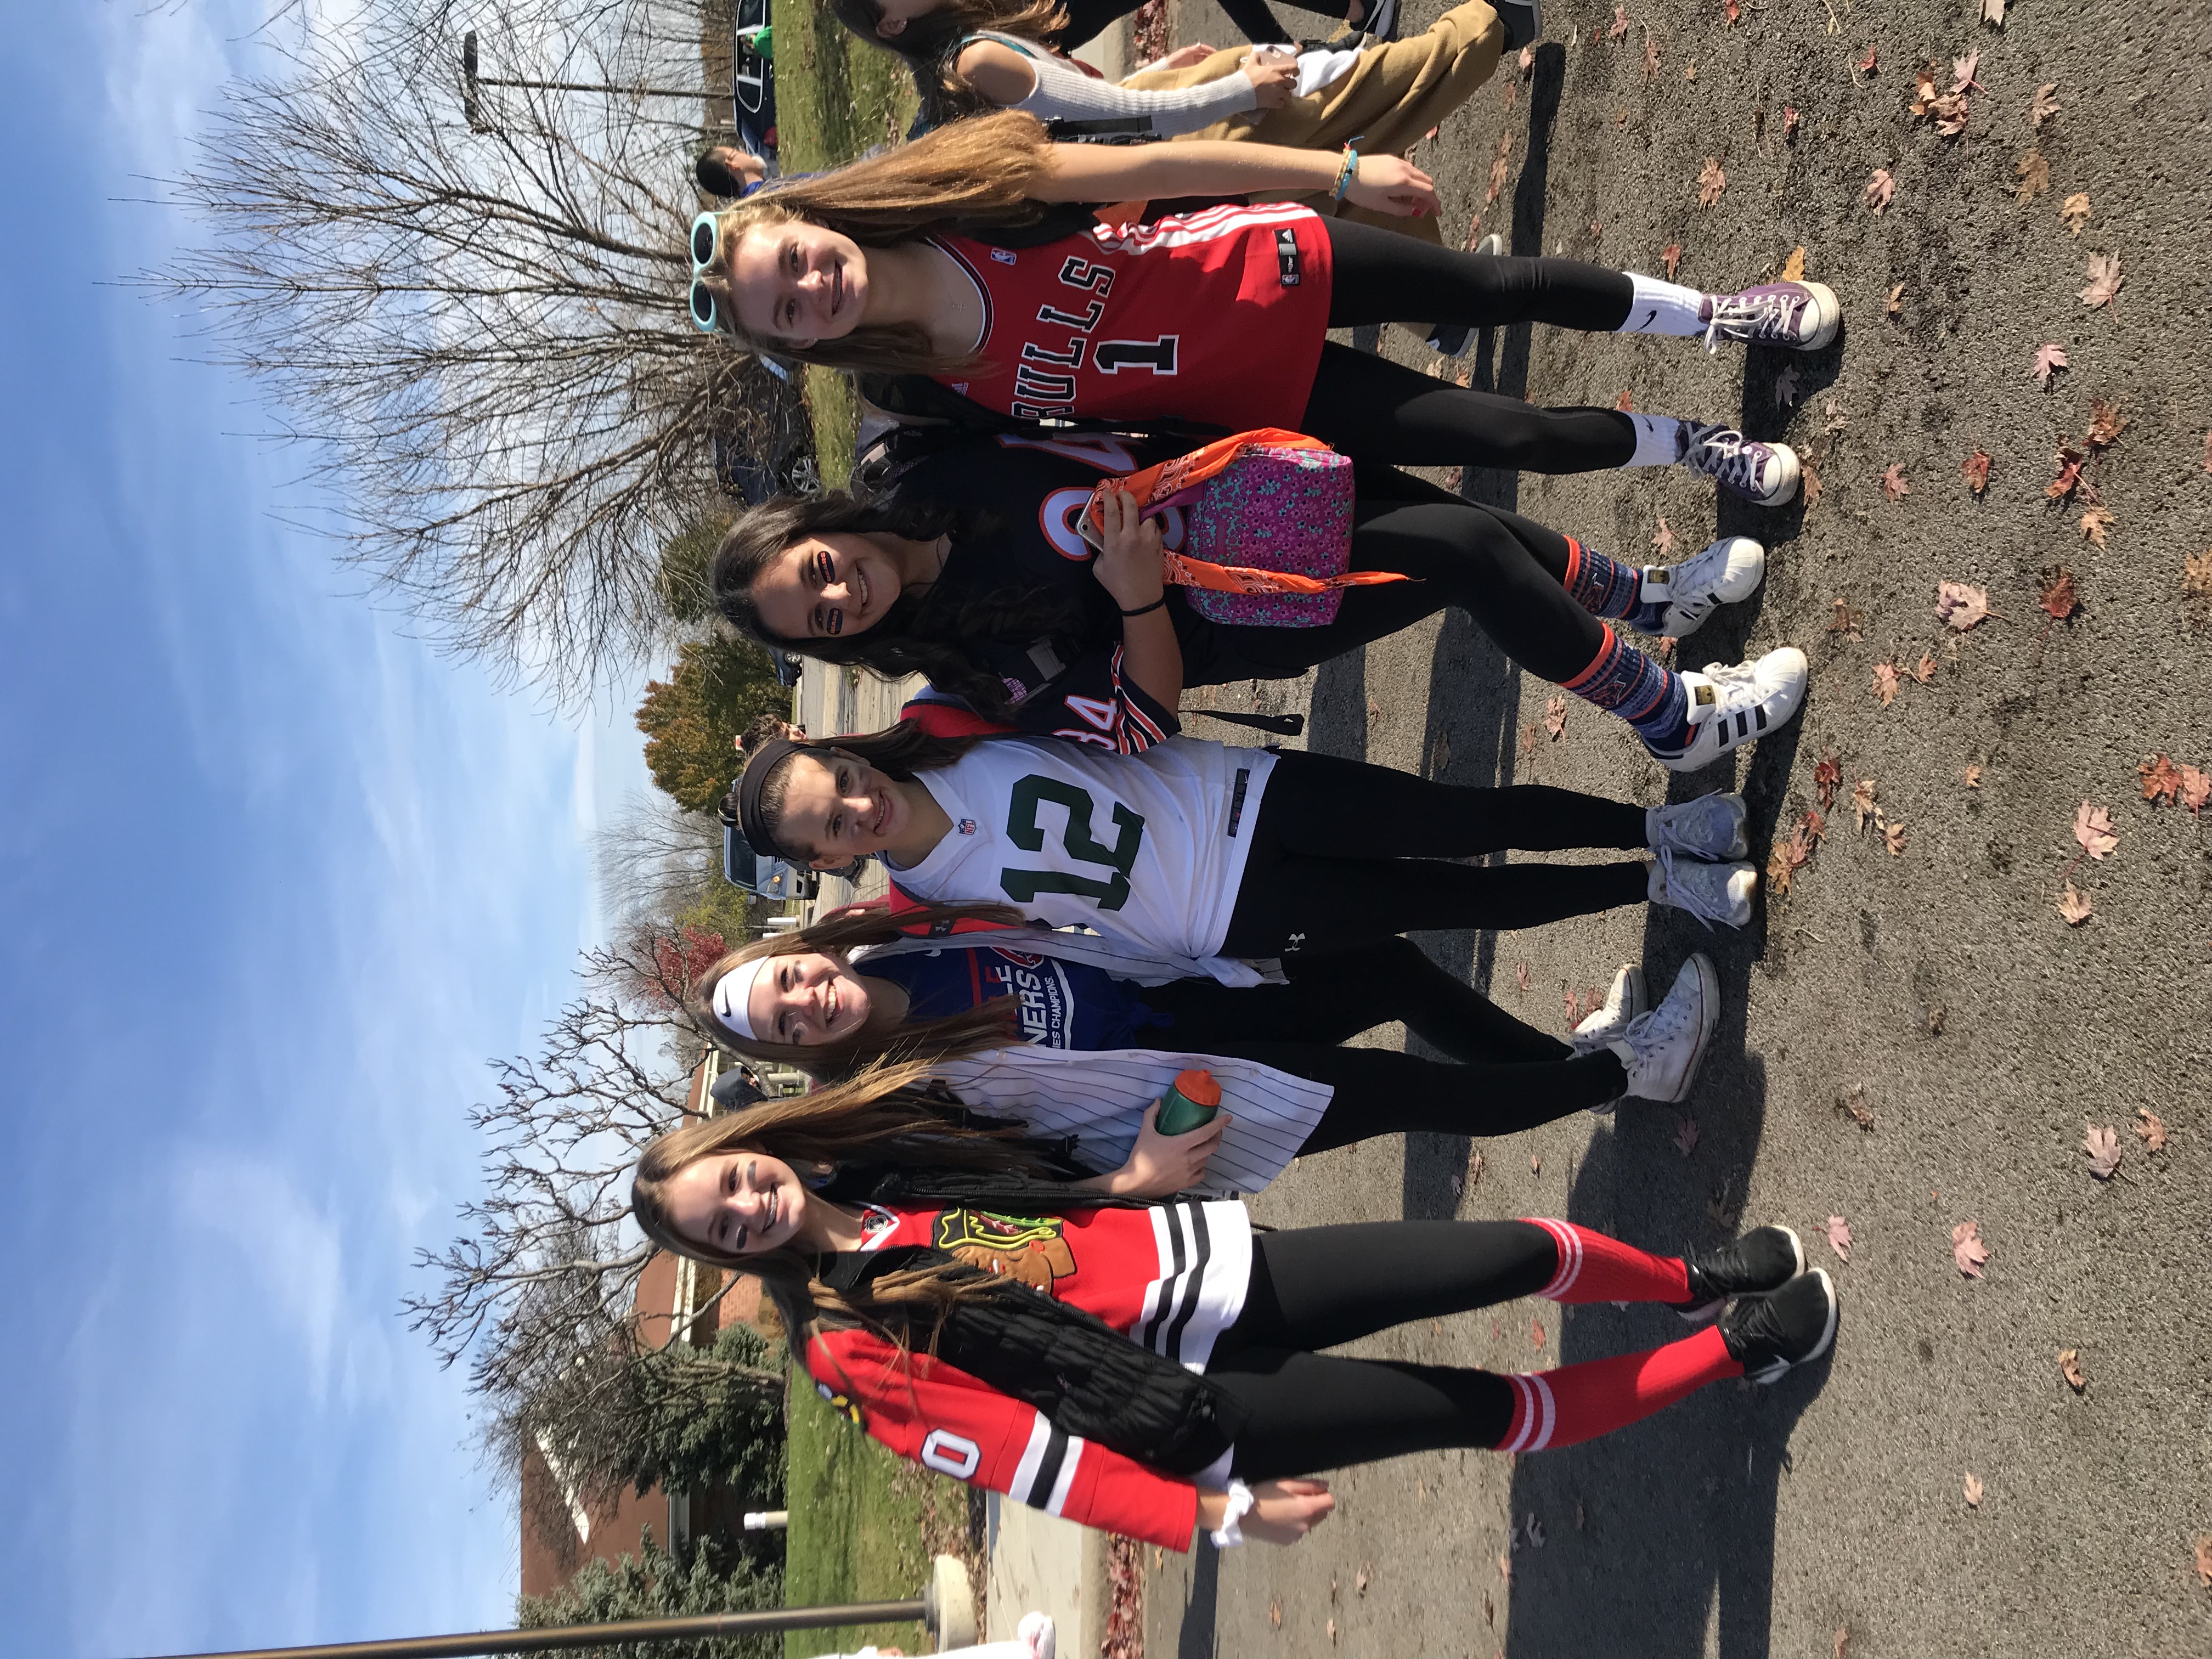 Students dressed as athletes